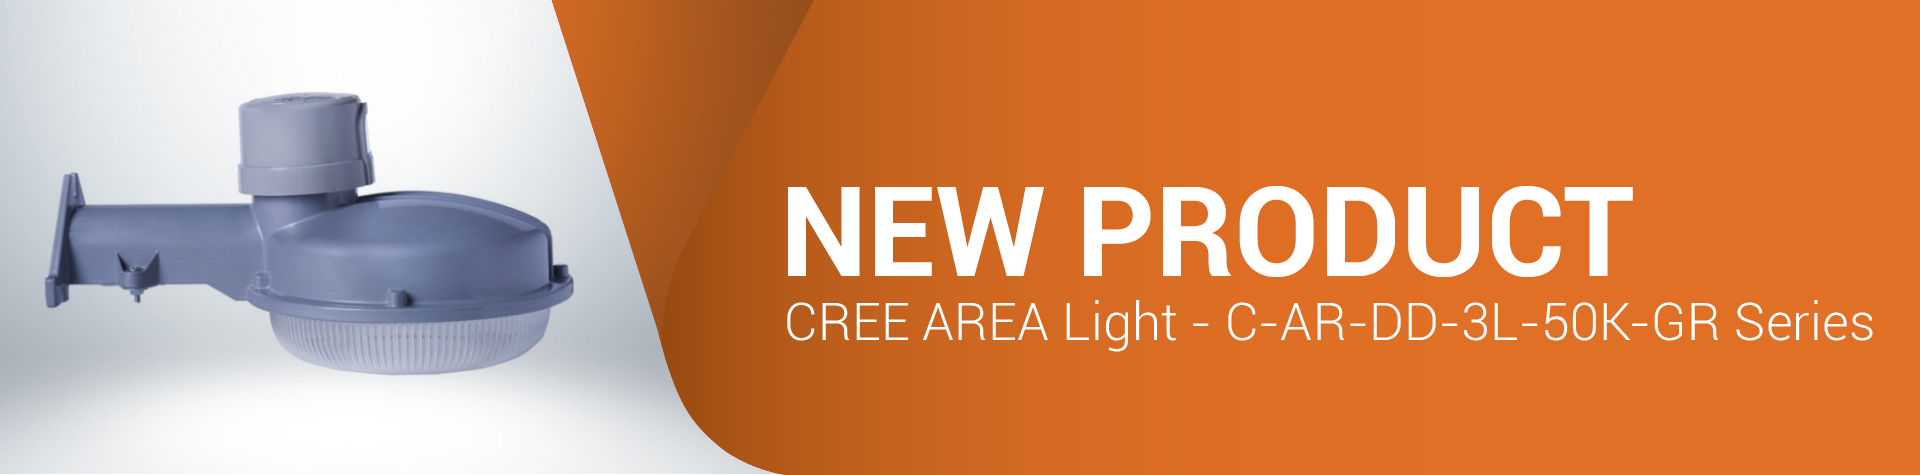 New Product- CREE Area Light